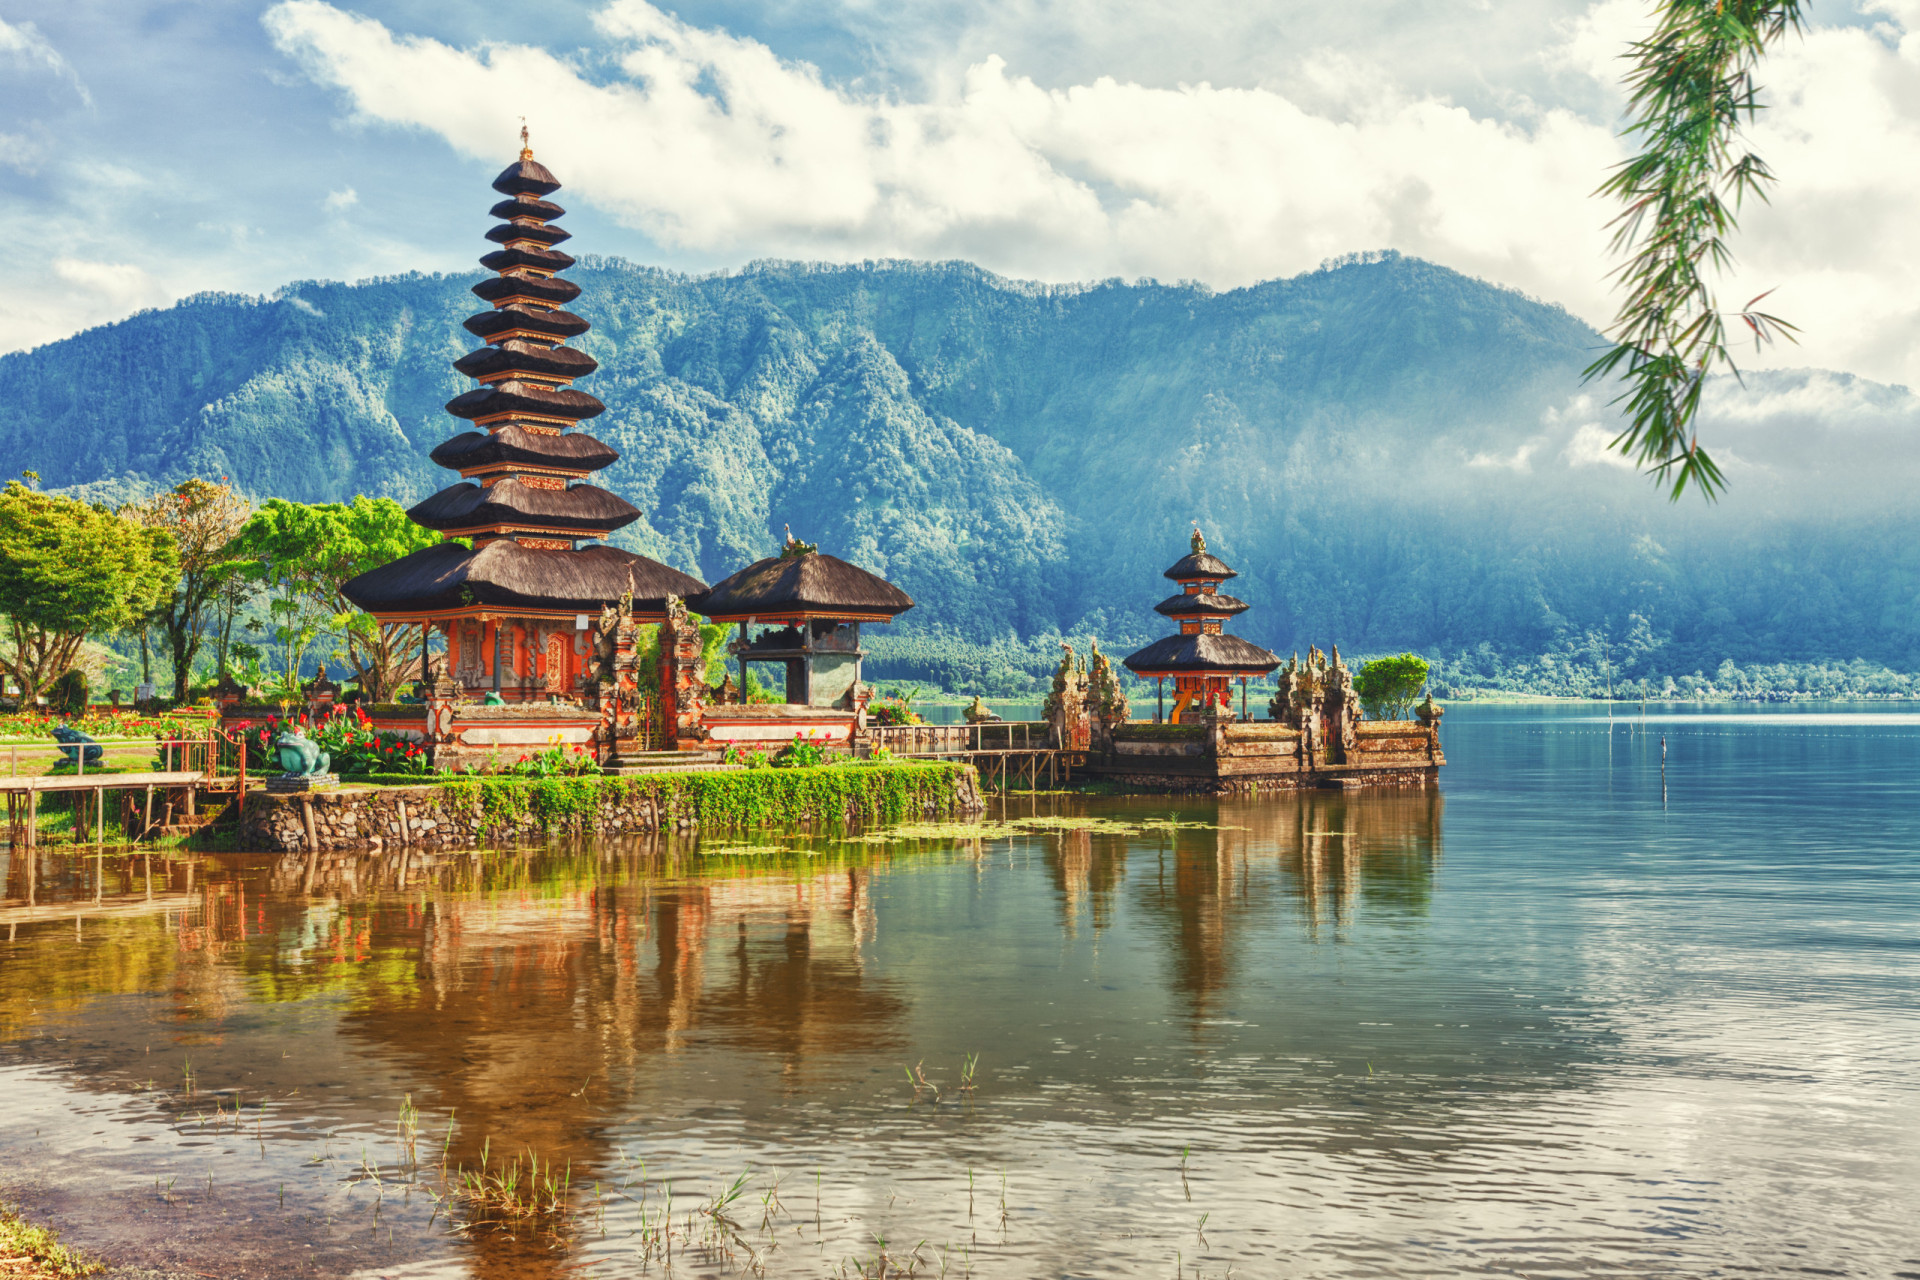 <p>Since February 2024, travelers have to pay 150,000 rupiah (USD$9.59) upon entering Bali.</p><p>You may also like:<a href="https://www.starsinsider.com/n/286504?utm_source=msn.com&utm_medium=display&utm_campaign=referral_description&utm_content=683460en-ph"> Fascinating facts you didn’t know about Disney parks</a></p>